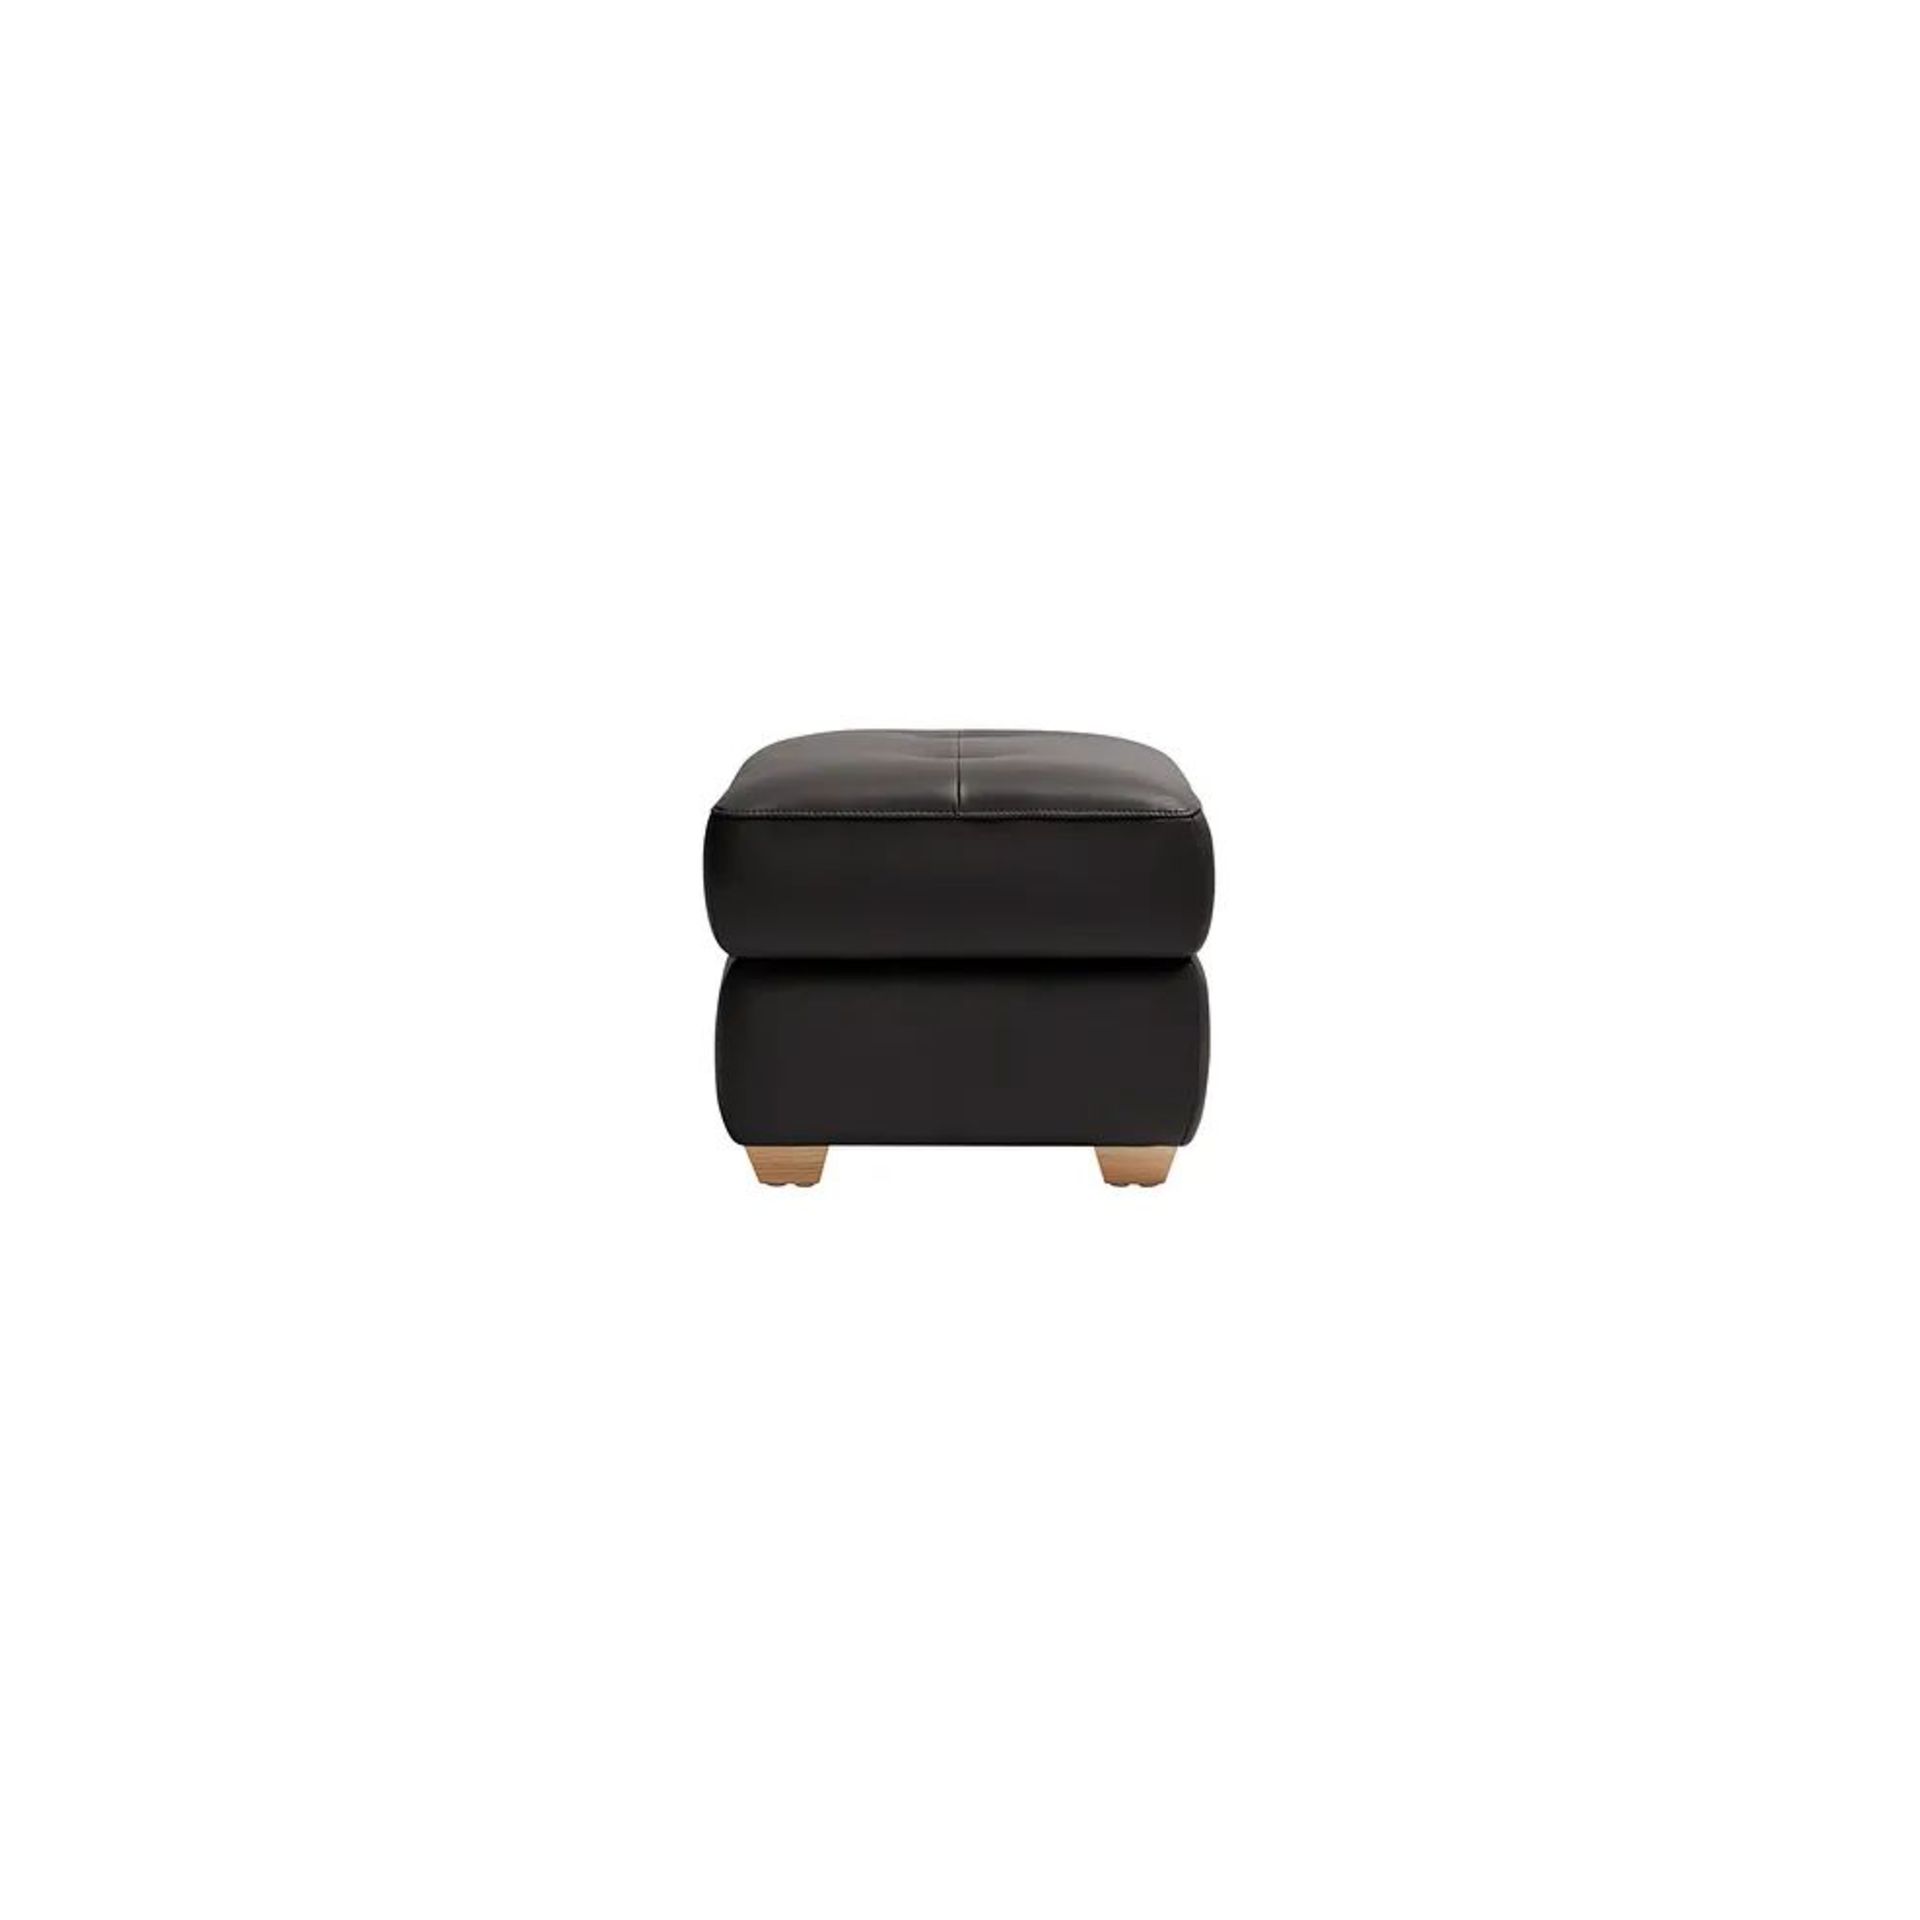 BRAND NEW SAMSON Storage Footstool - BLACK LEATHER. RRP £349. Characterised by a simple cuboid - Image 4 of 7